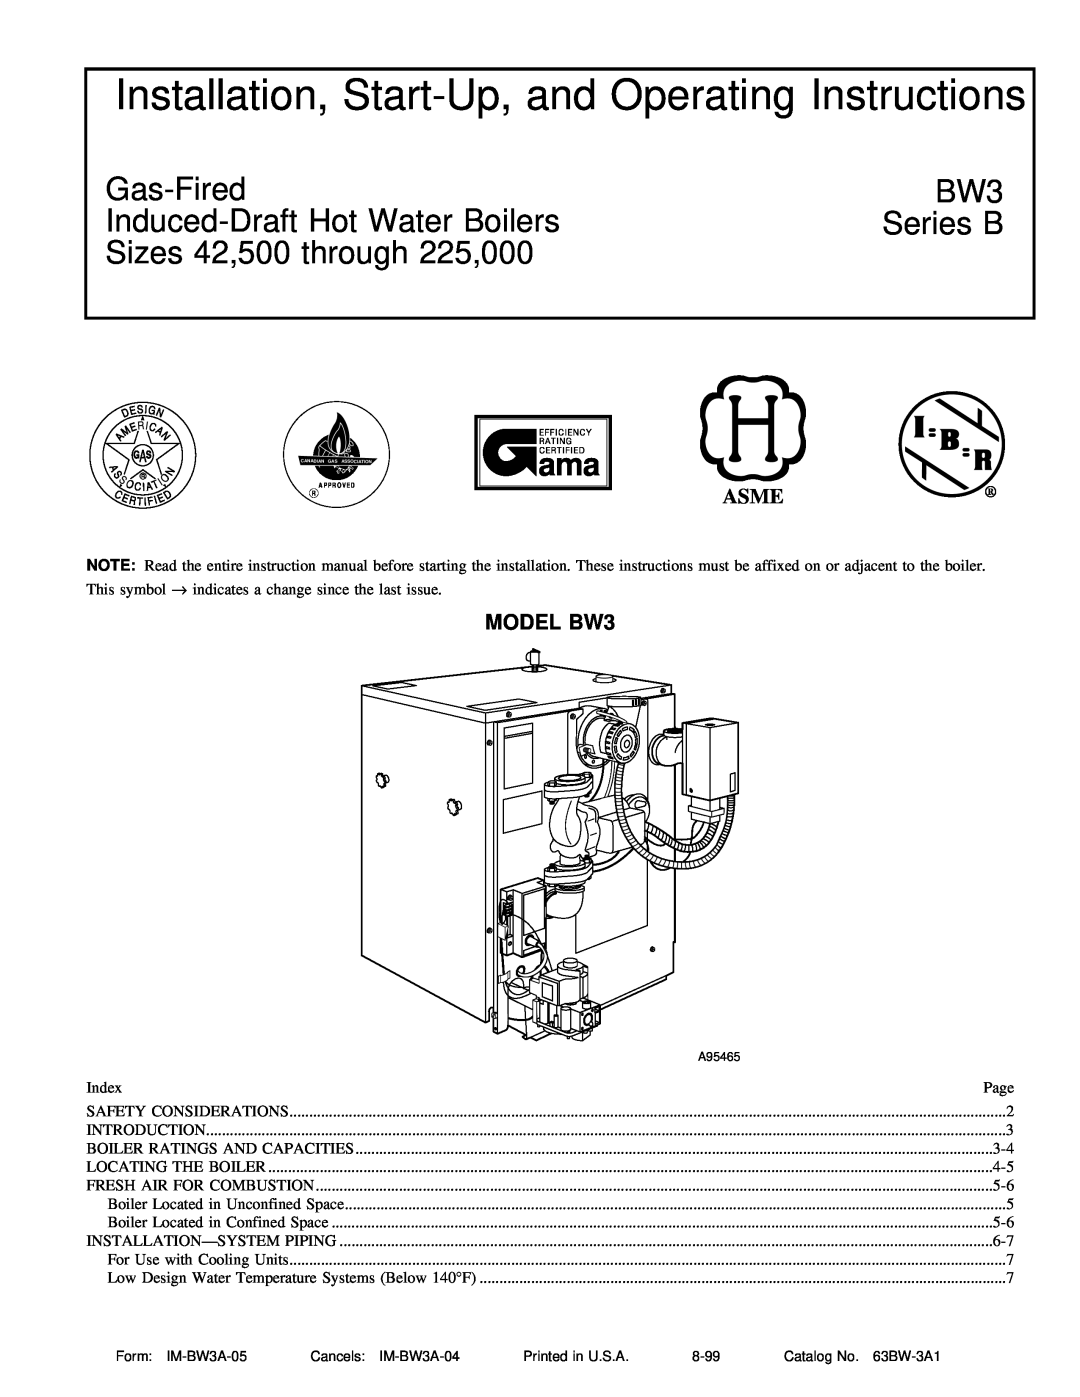 National Products BW3 instruction manual Gas-Fired, Induced-DraftHot Water Boilers, Series B, Sizes 42,500 through 225,000 